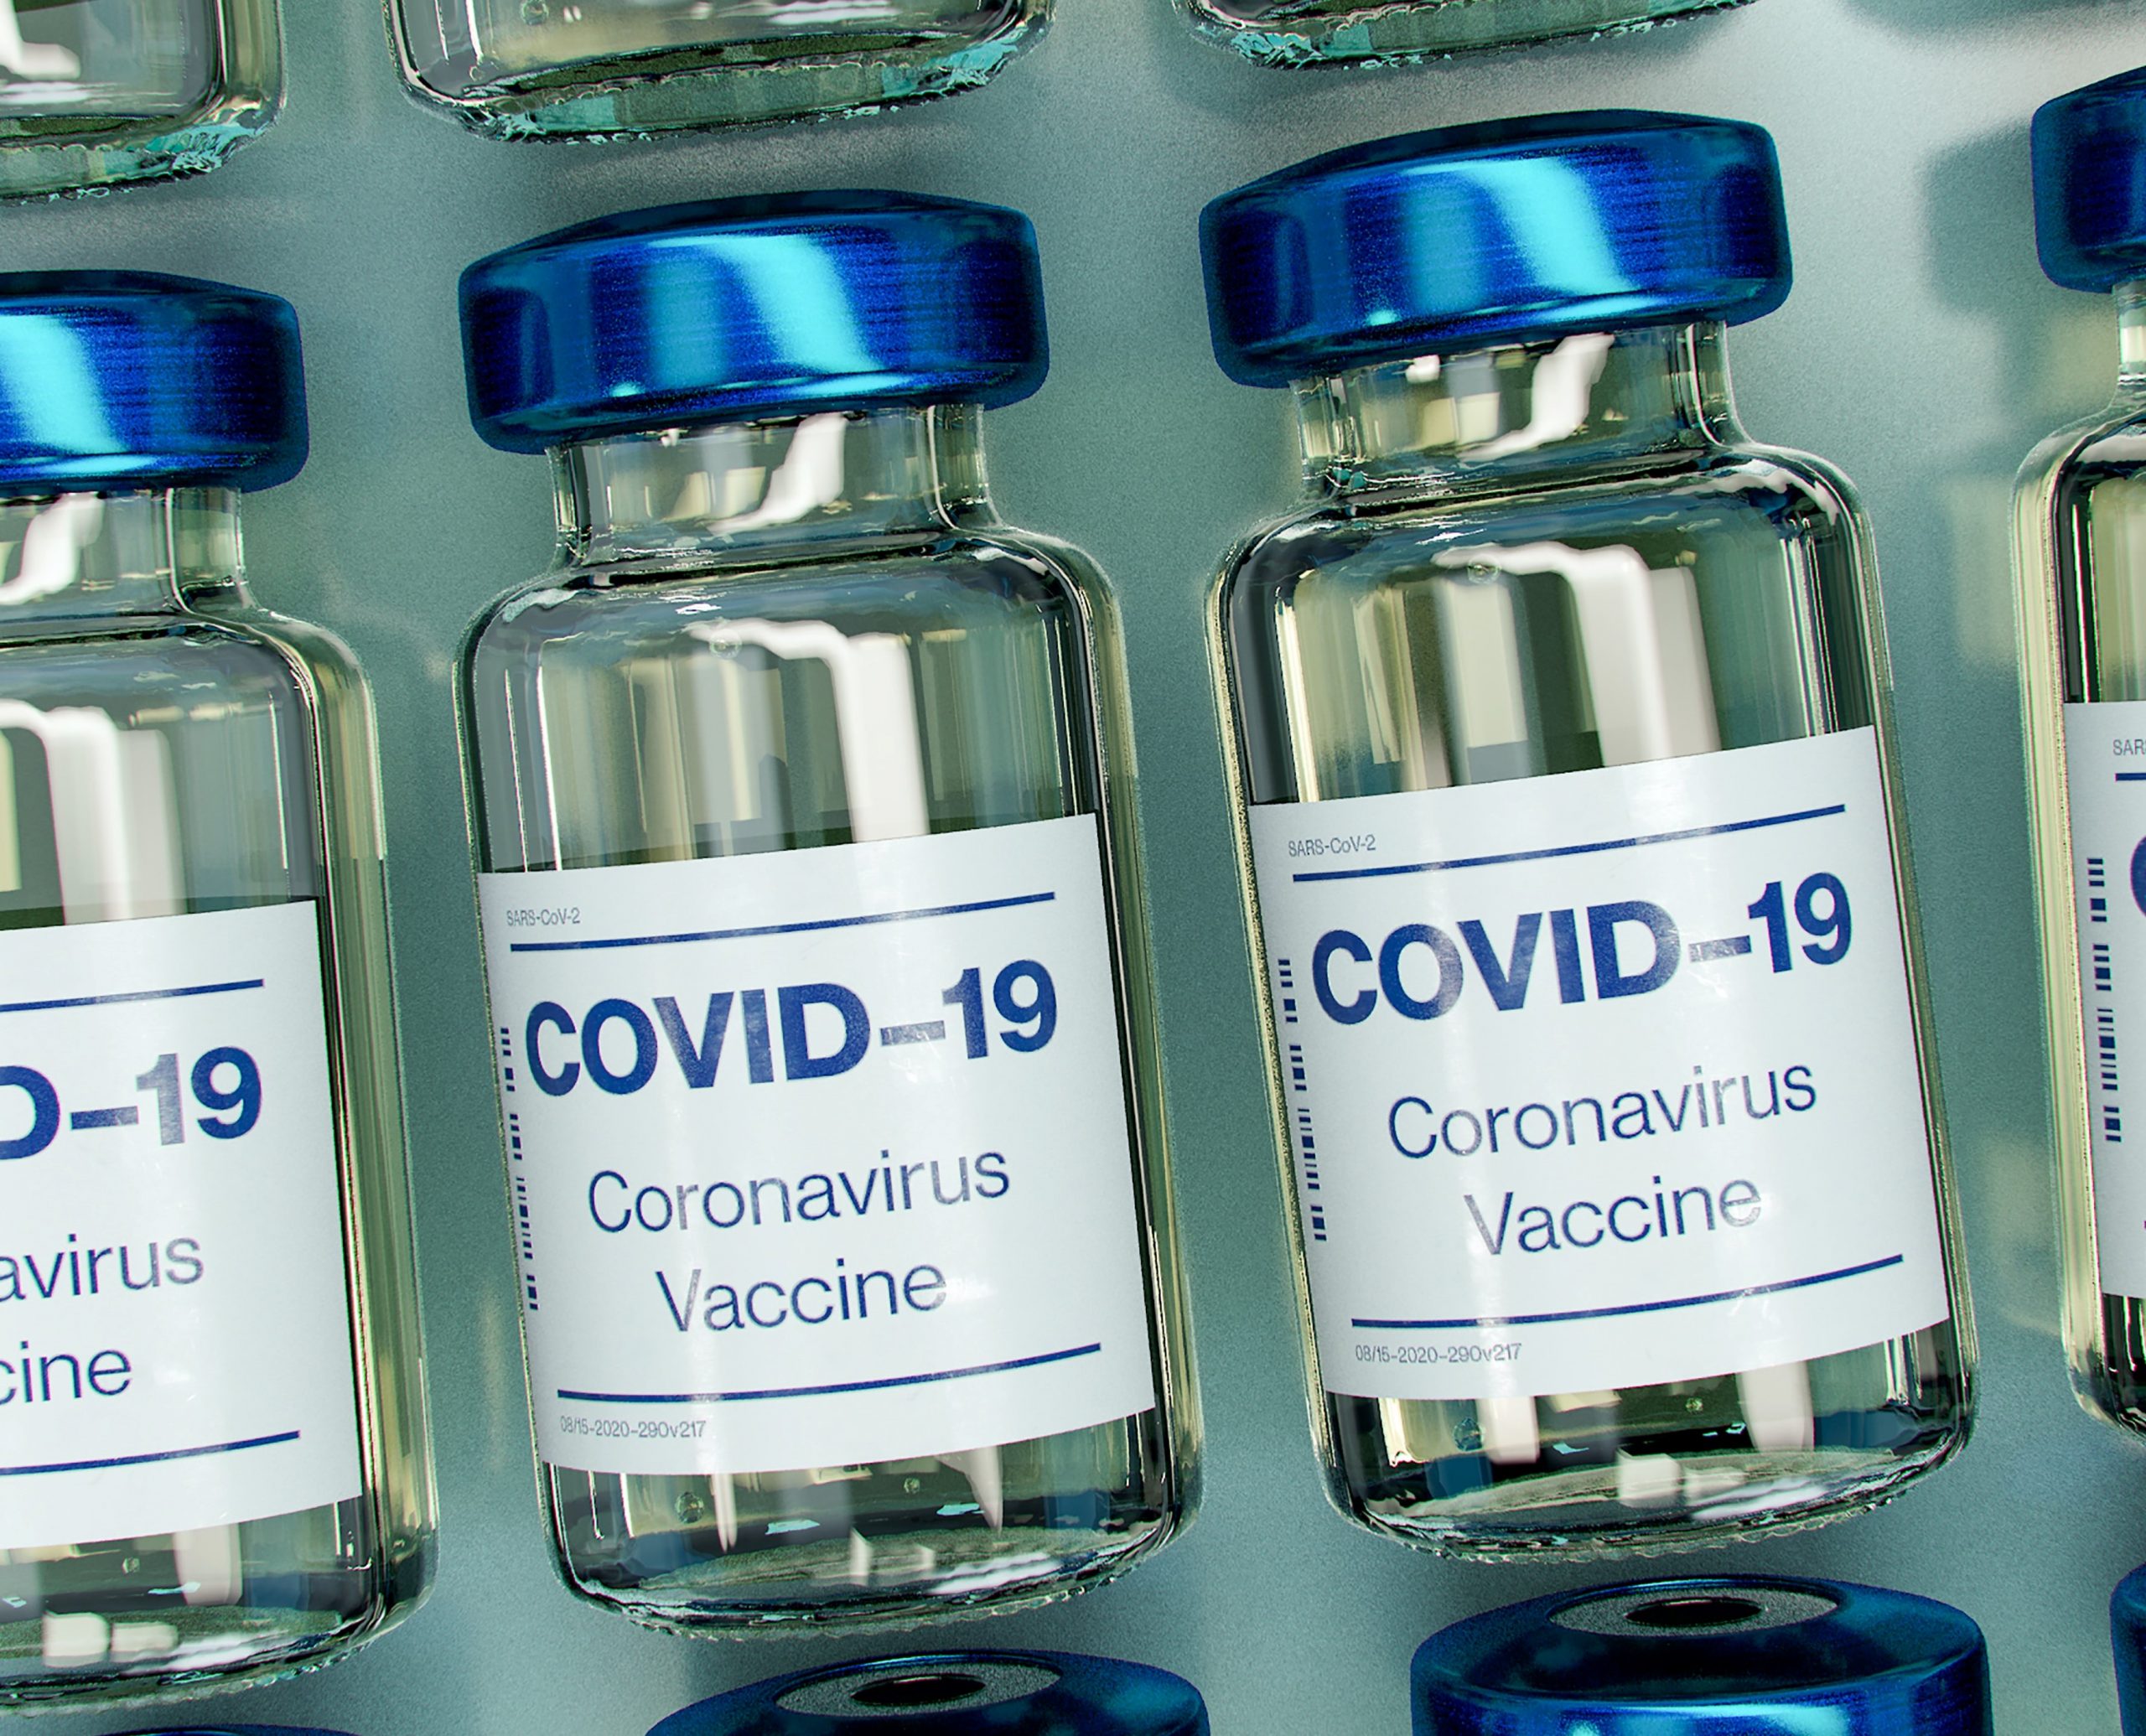 COVID-19 – Netherlands to provide 3 mln doses of vaccine for Indonesia